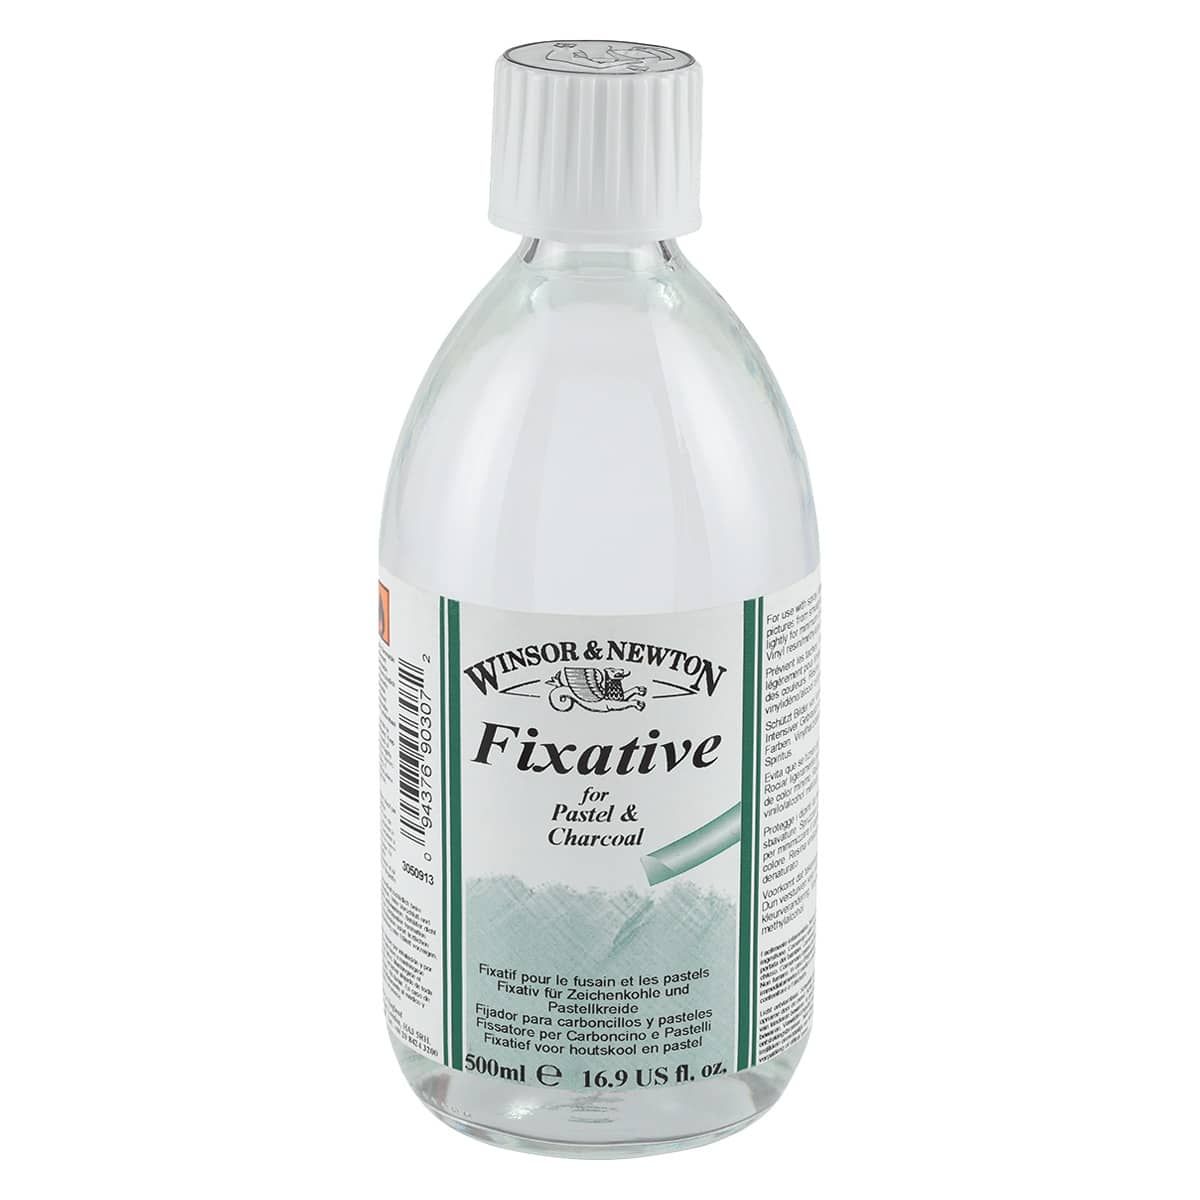 Fixative Winsor&Newton spray for drawing Charkov art and craft